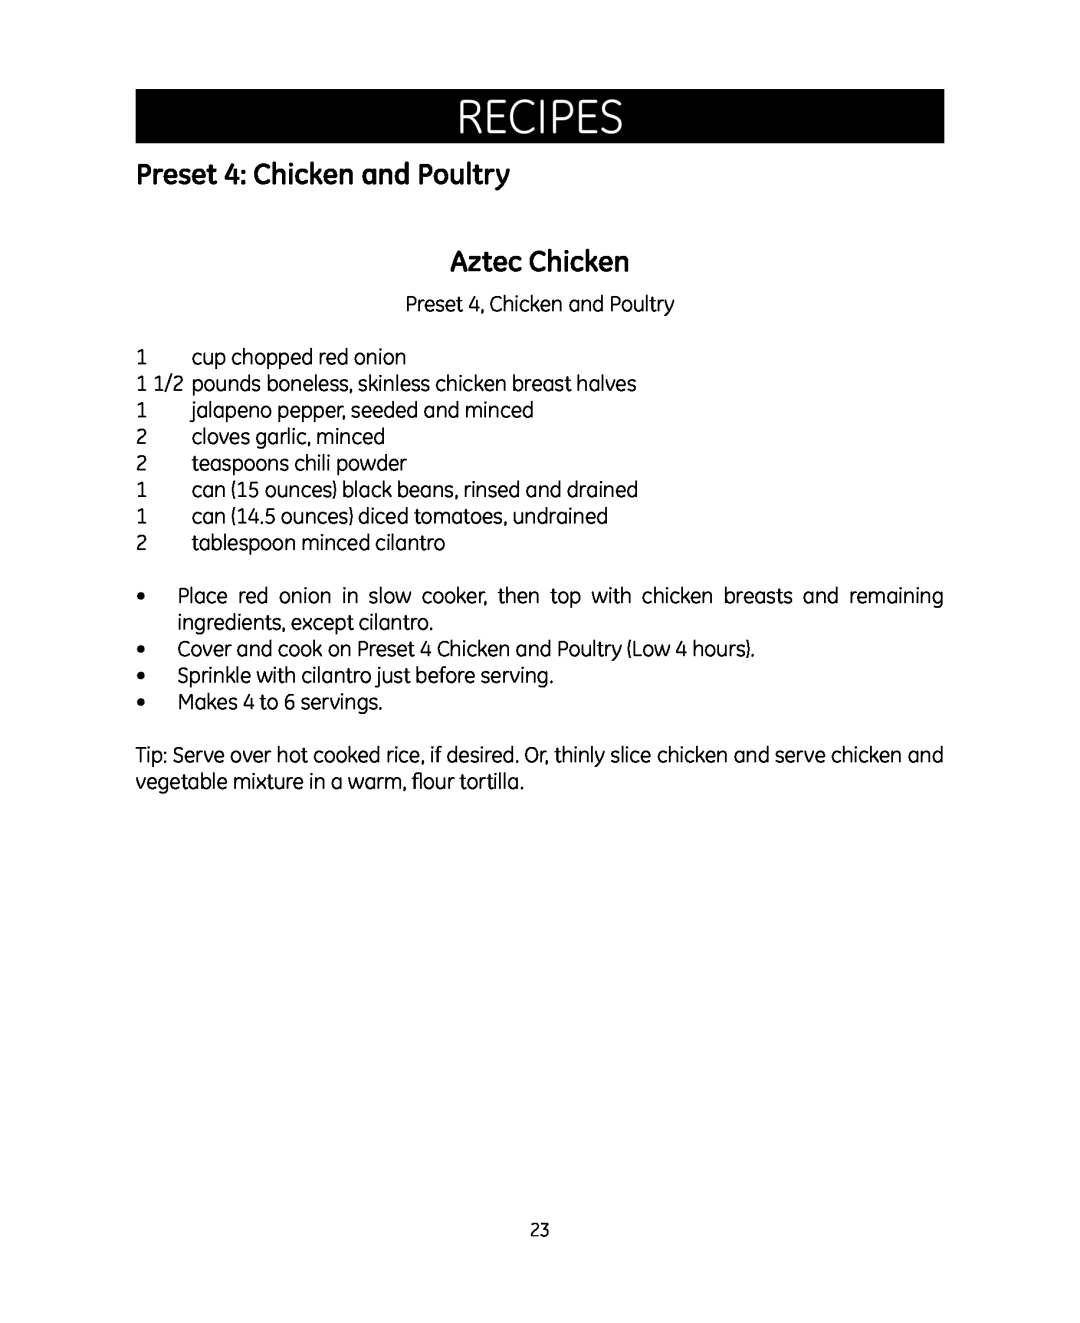 GE 681131692007 manual Preset 4 Chicken and Poultry Aztec Chicken, Recipes 